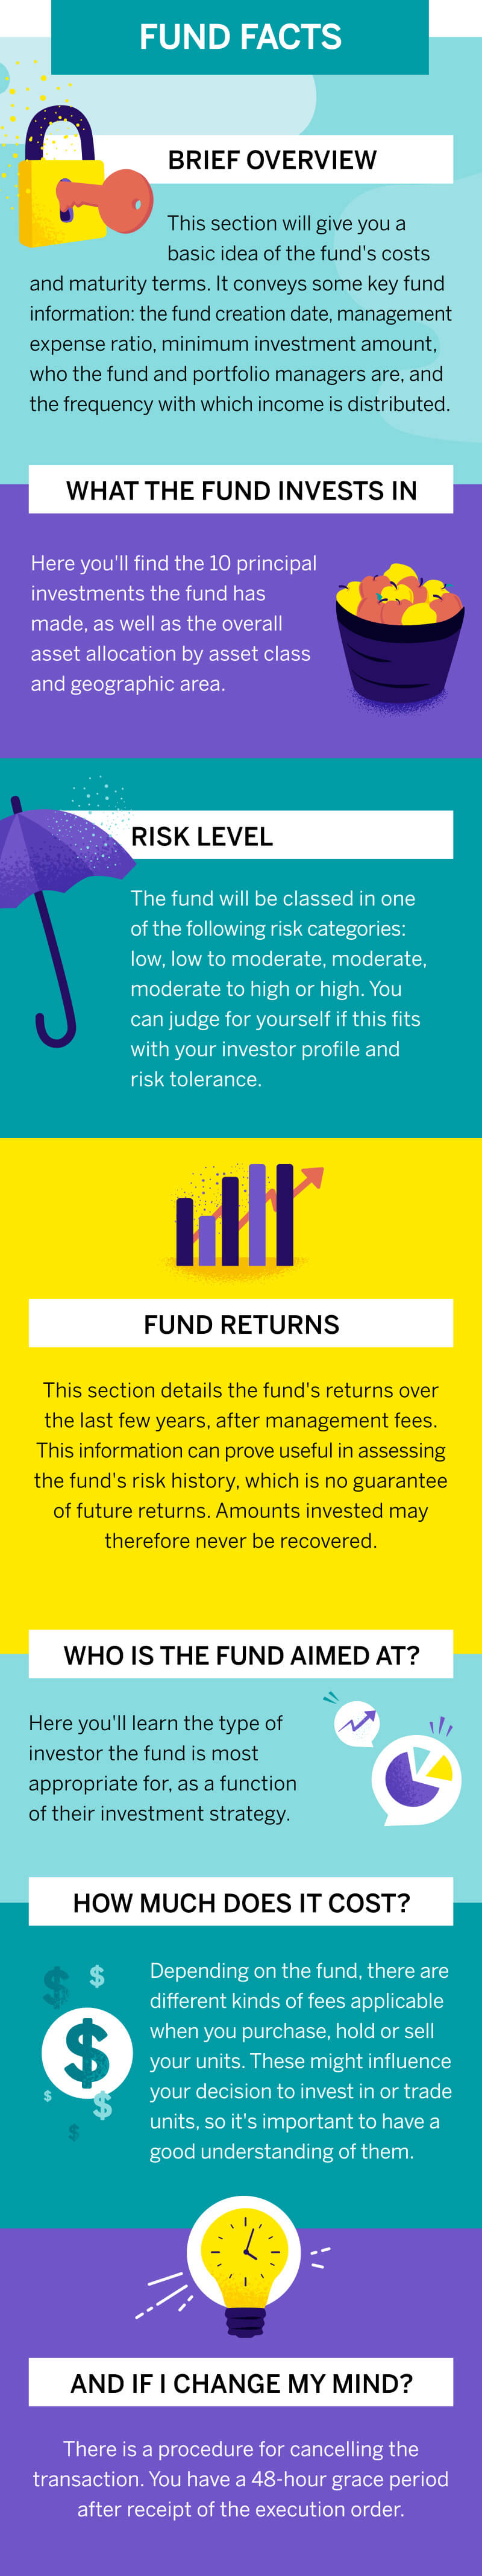 Description of the fund facts